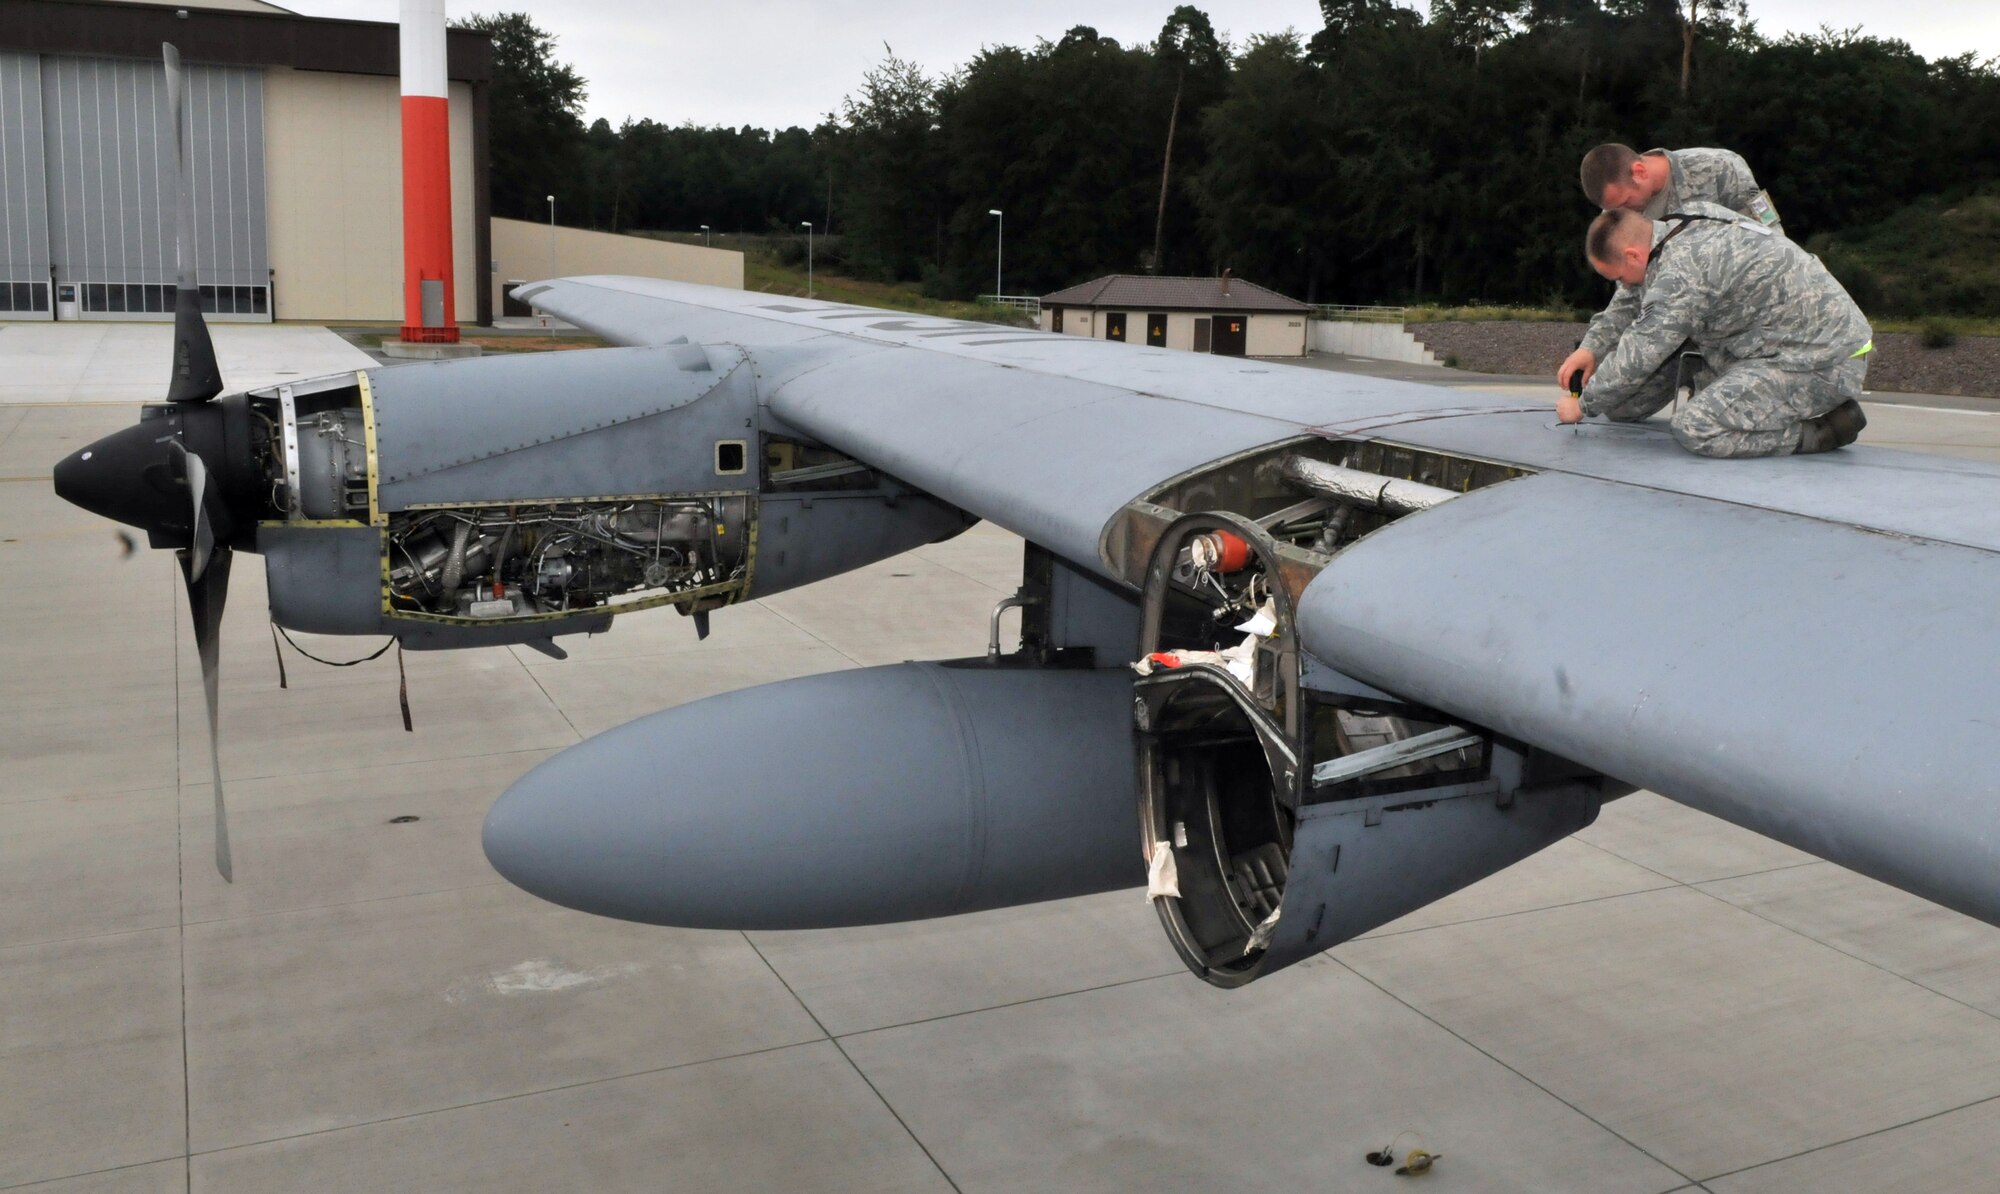 U.S. Air Force Airmen from the 86th Maintenance Squadron perform an isochronical inspection on a C-130E Hercules, July 22, 2009, Ramstein Air Base, Germany. This is the final ISO inspection on the C-130E Hercules on Ramstein as the base continues to replace the C-130E with the new C-130J Super Hercules. (U.S. Air Force photo by Senior Airman Nathan Lipscomb)